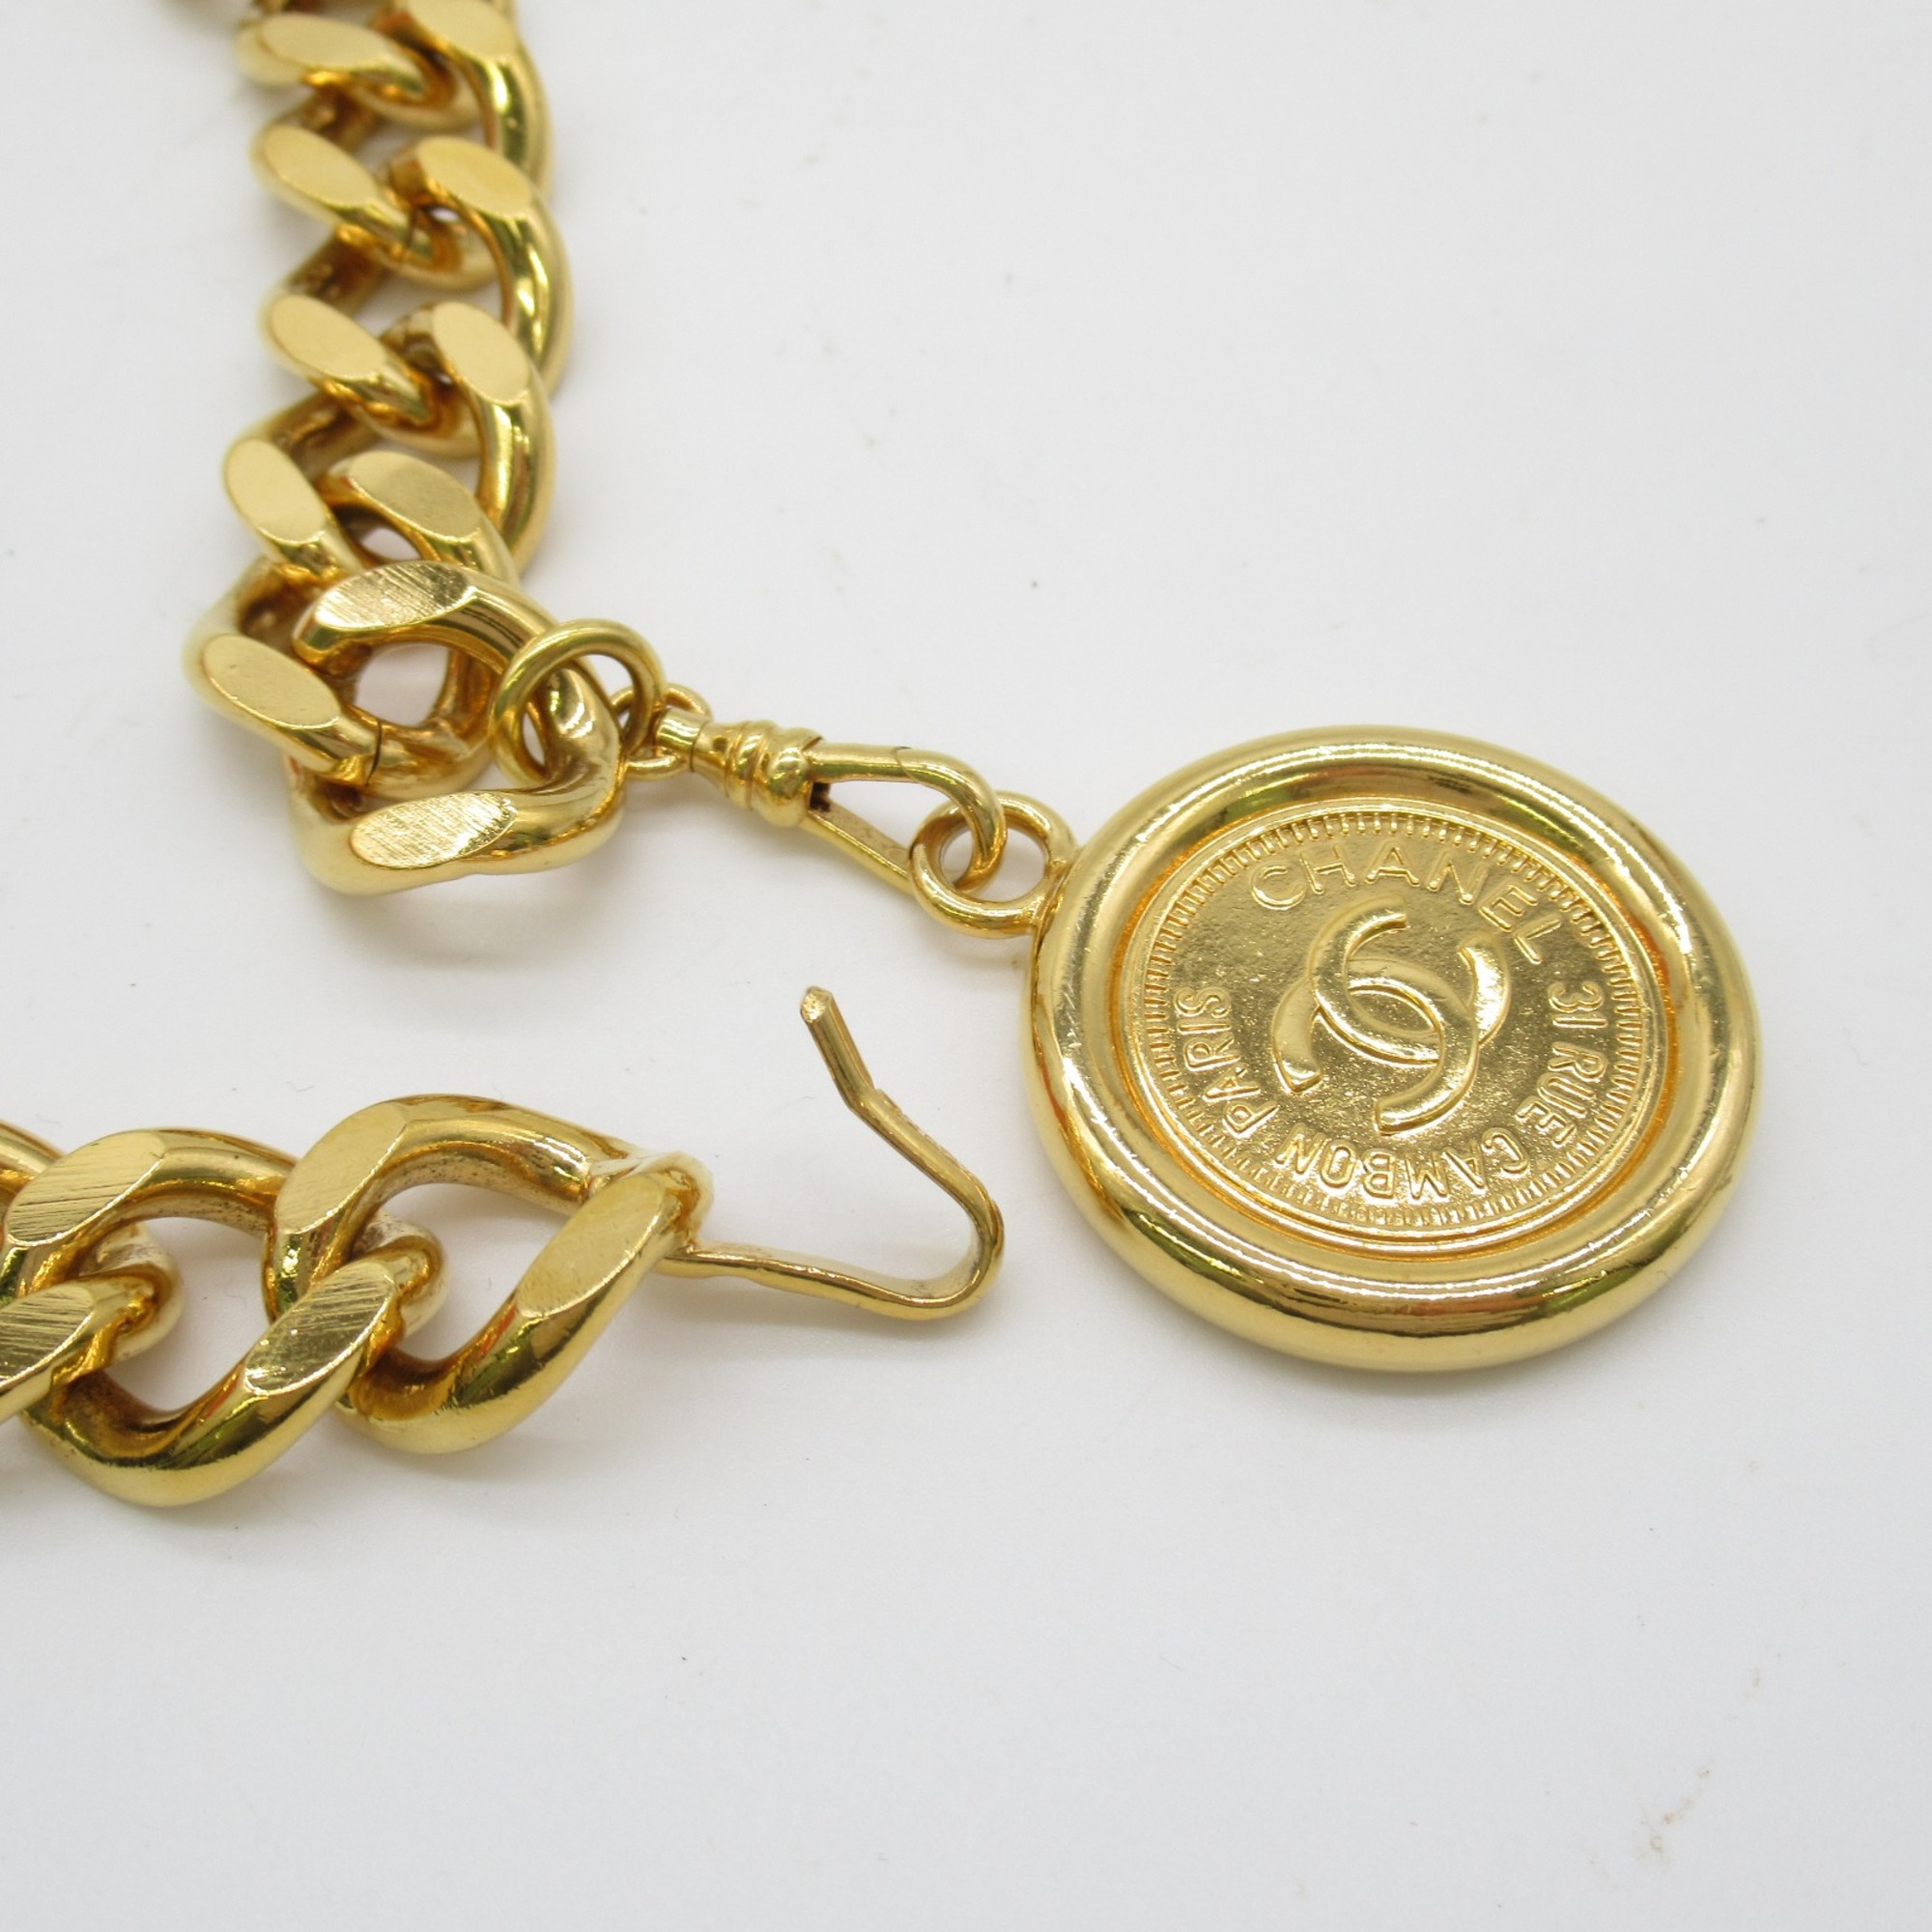 CHANEL Chain belt Gold Gold Plated